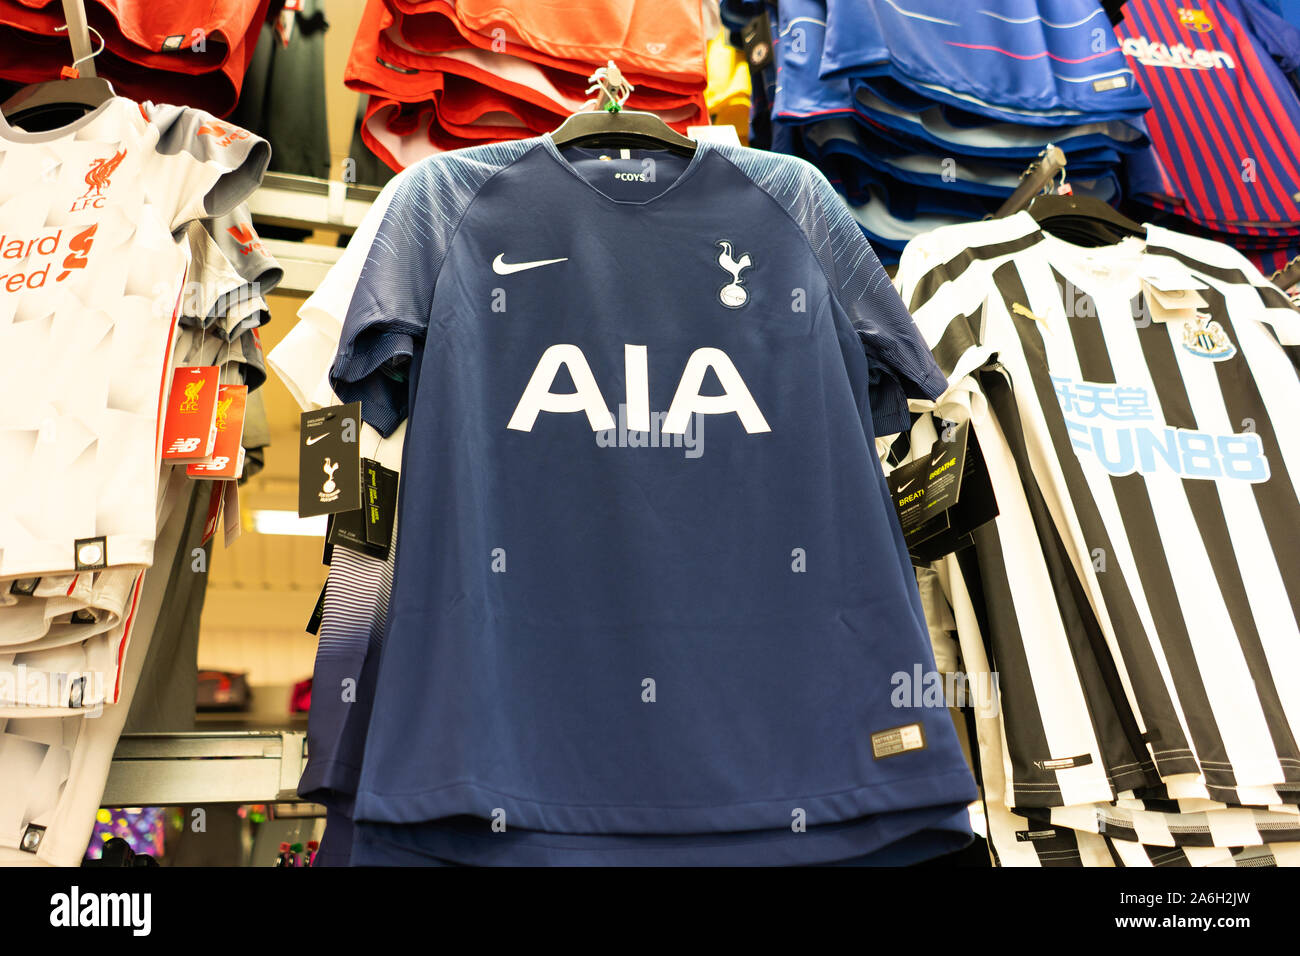 arsenal tops sports direct